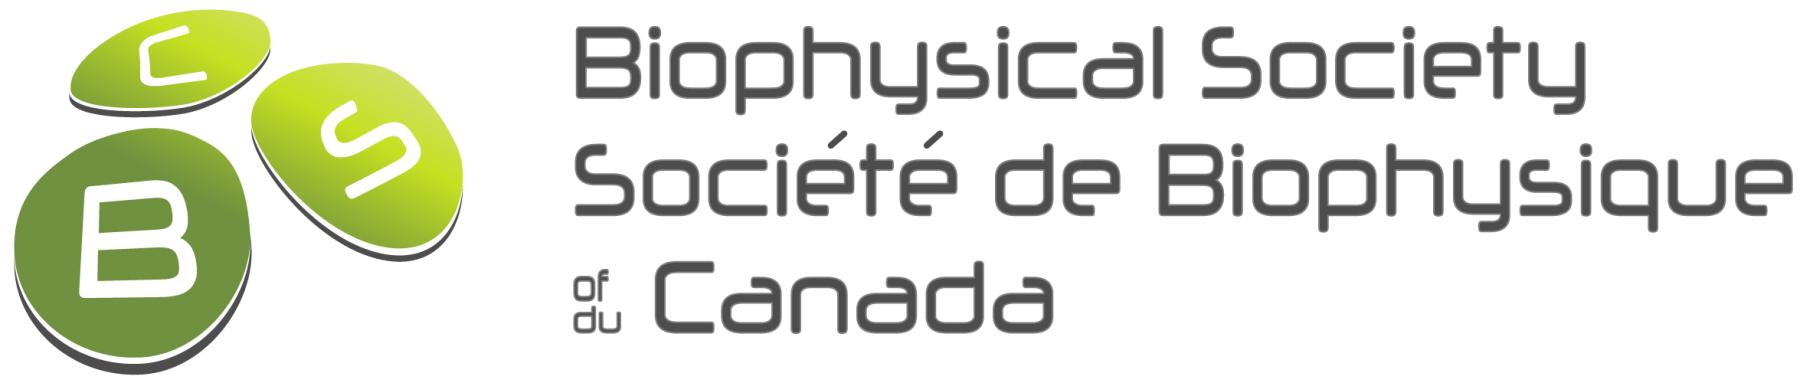 Logo for the Biophysical Society of Canada